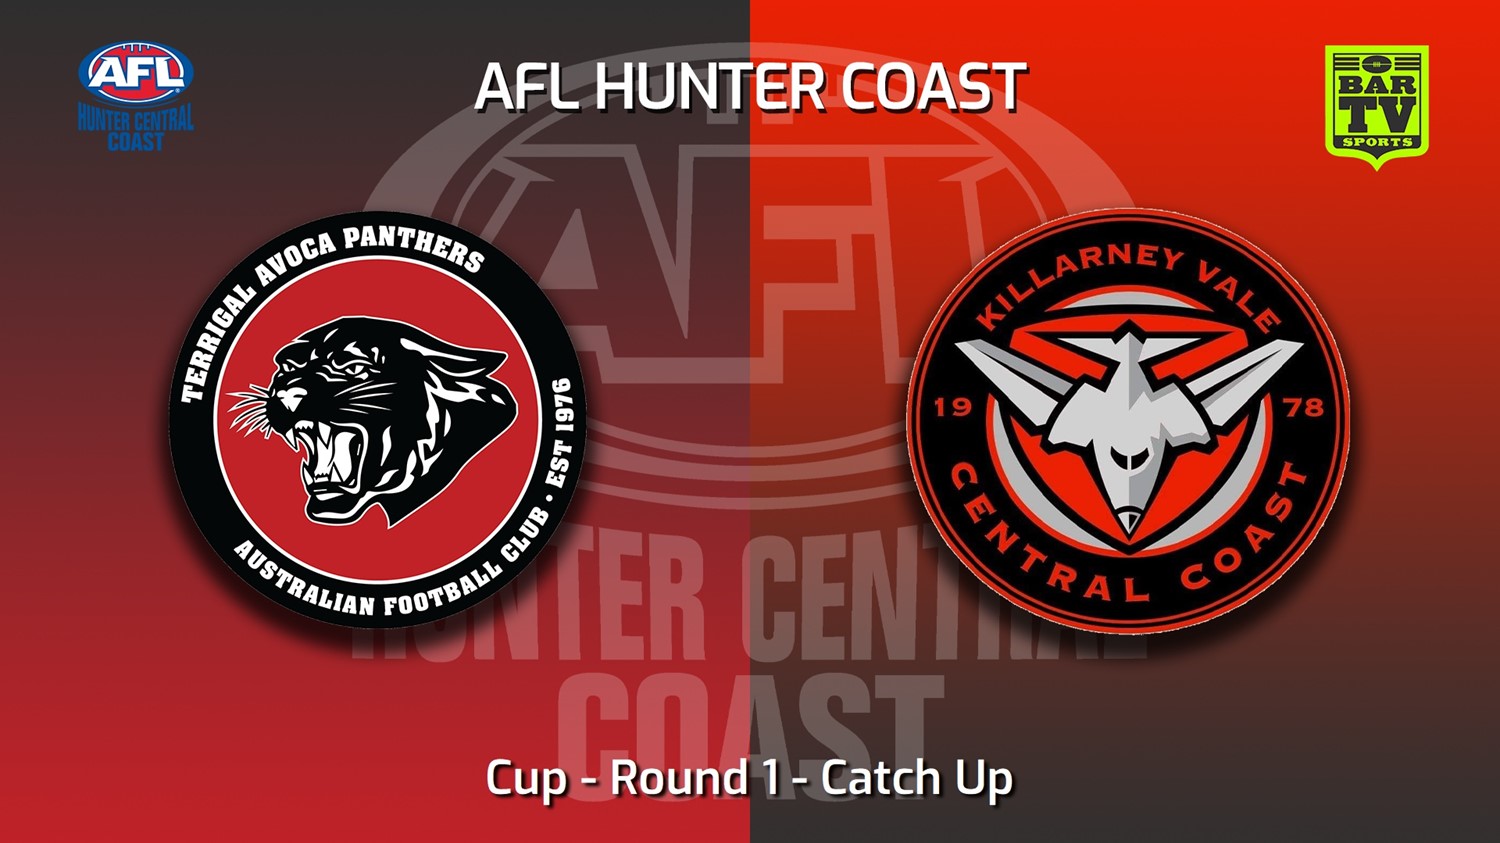 220702-AFL Hunter Central Coast Round 1 - Catch Up - Cup - Terrigal Avoca Panthers v Killarney Vale Bombers Minigame Slate Image